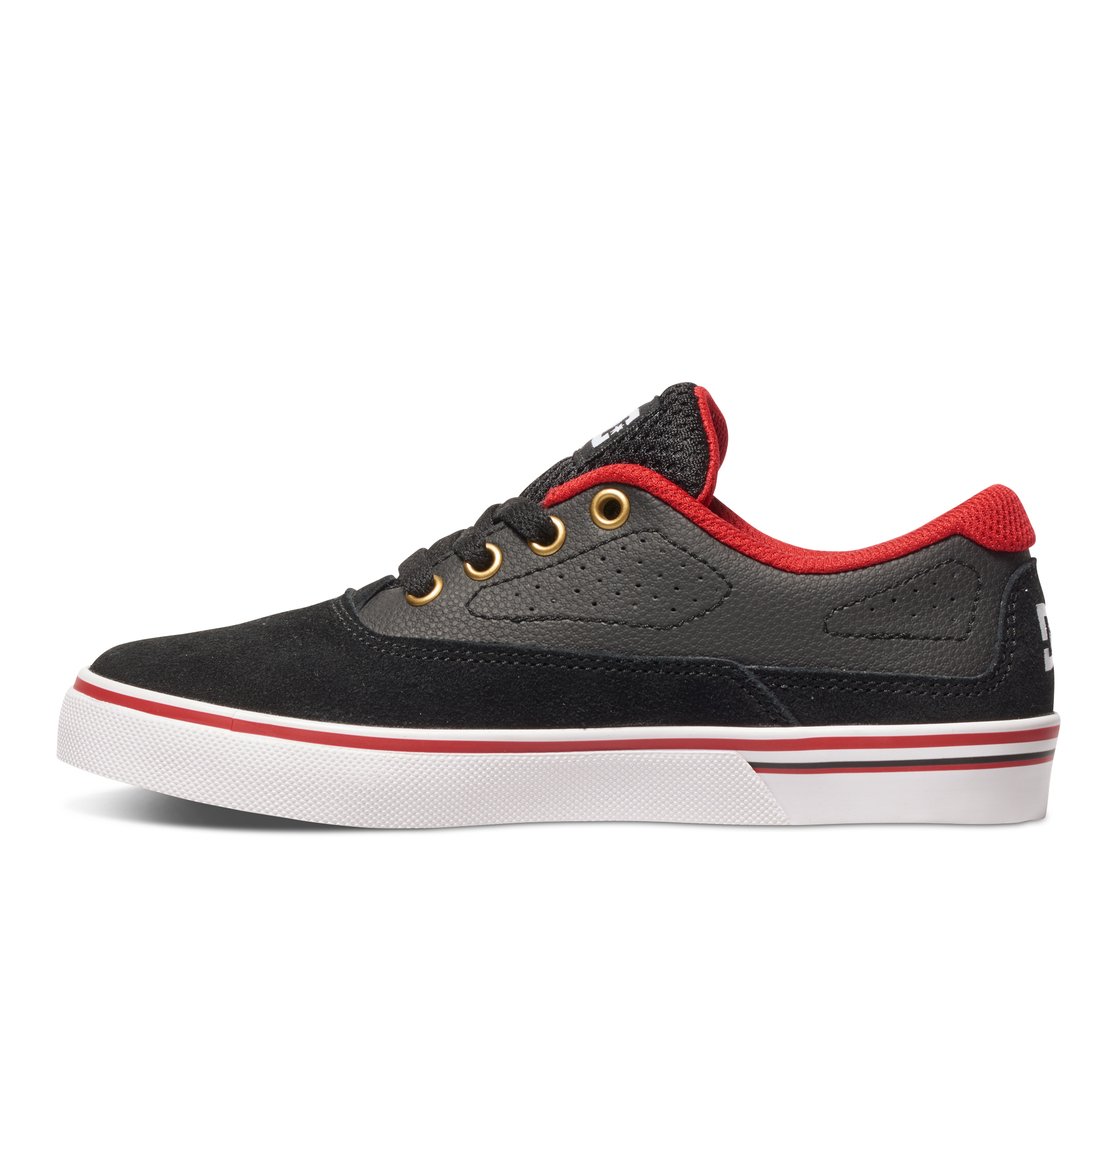 Boy's 8-16 Sultan Shoes ADBS300077 | DC Shoes